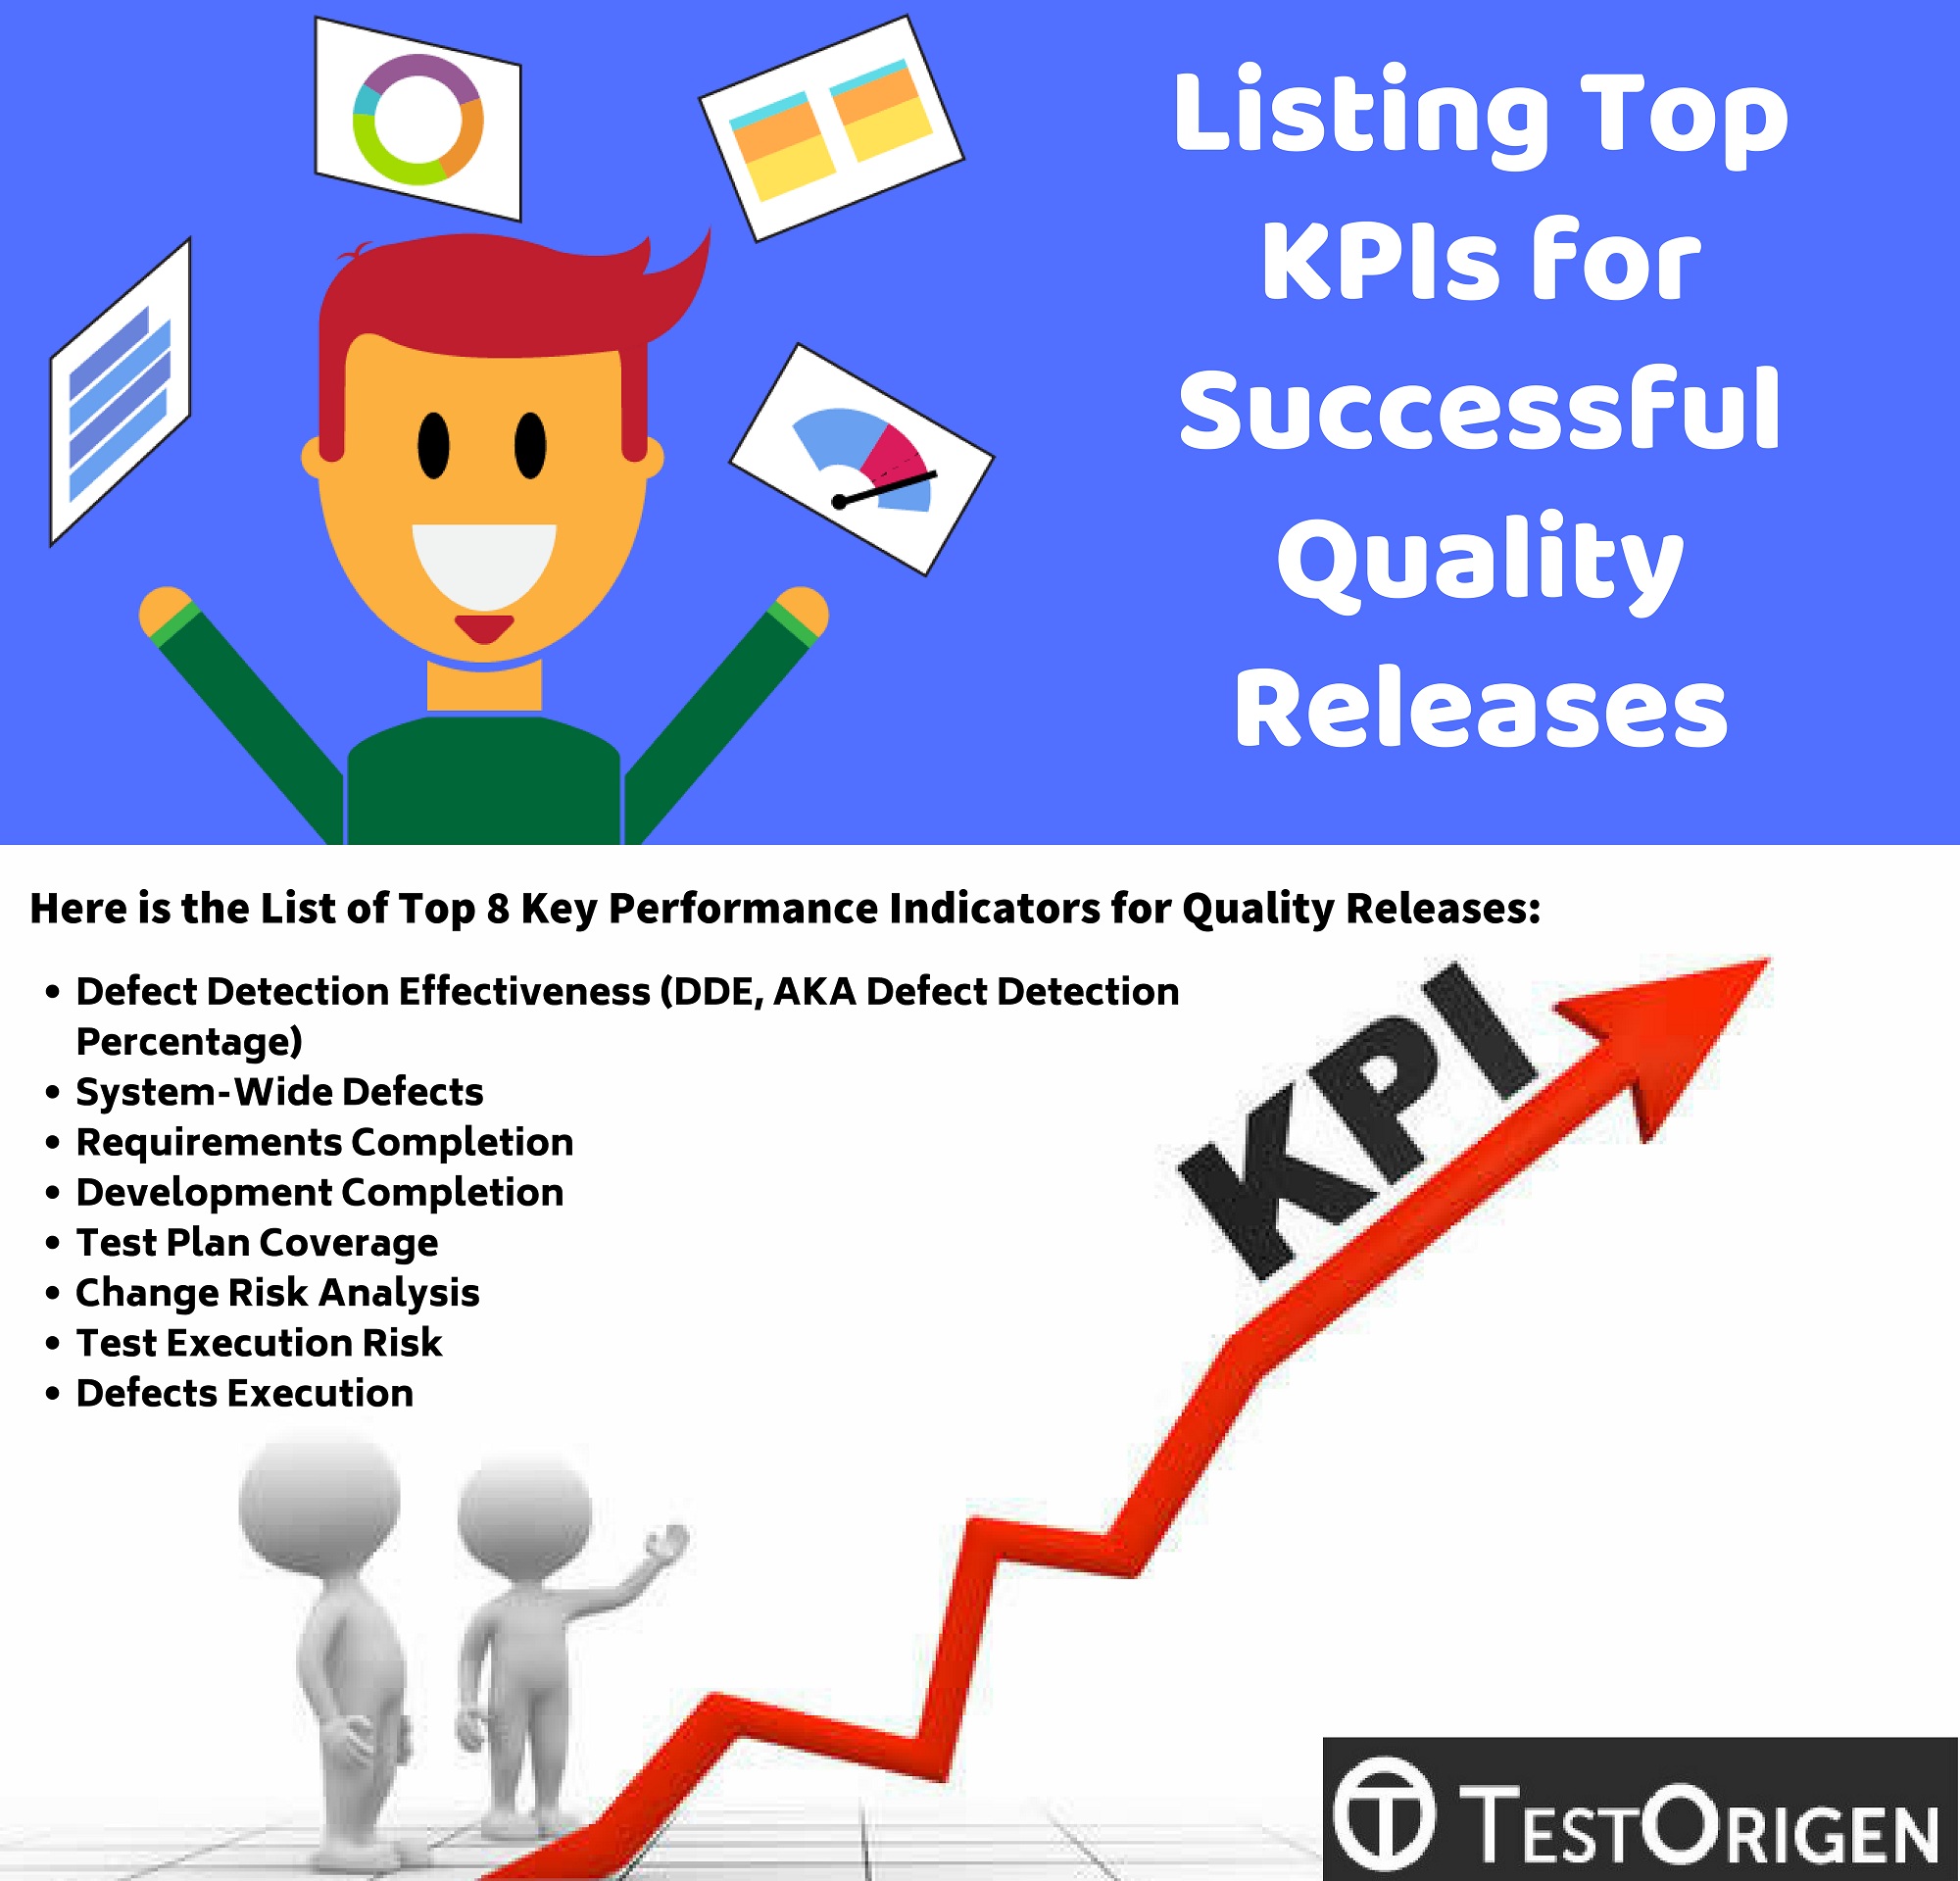 Listing Top KPIs for Successful Quality Releases